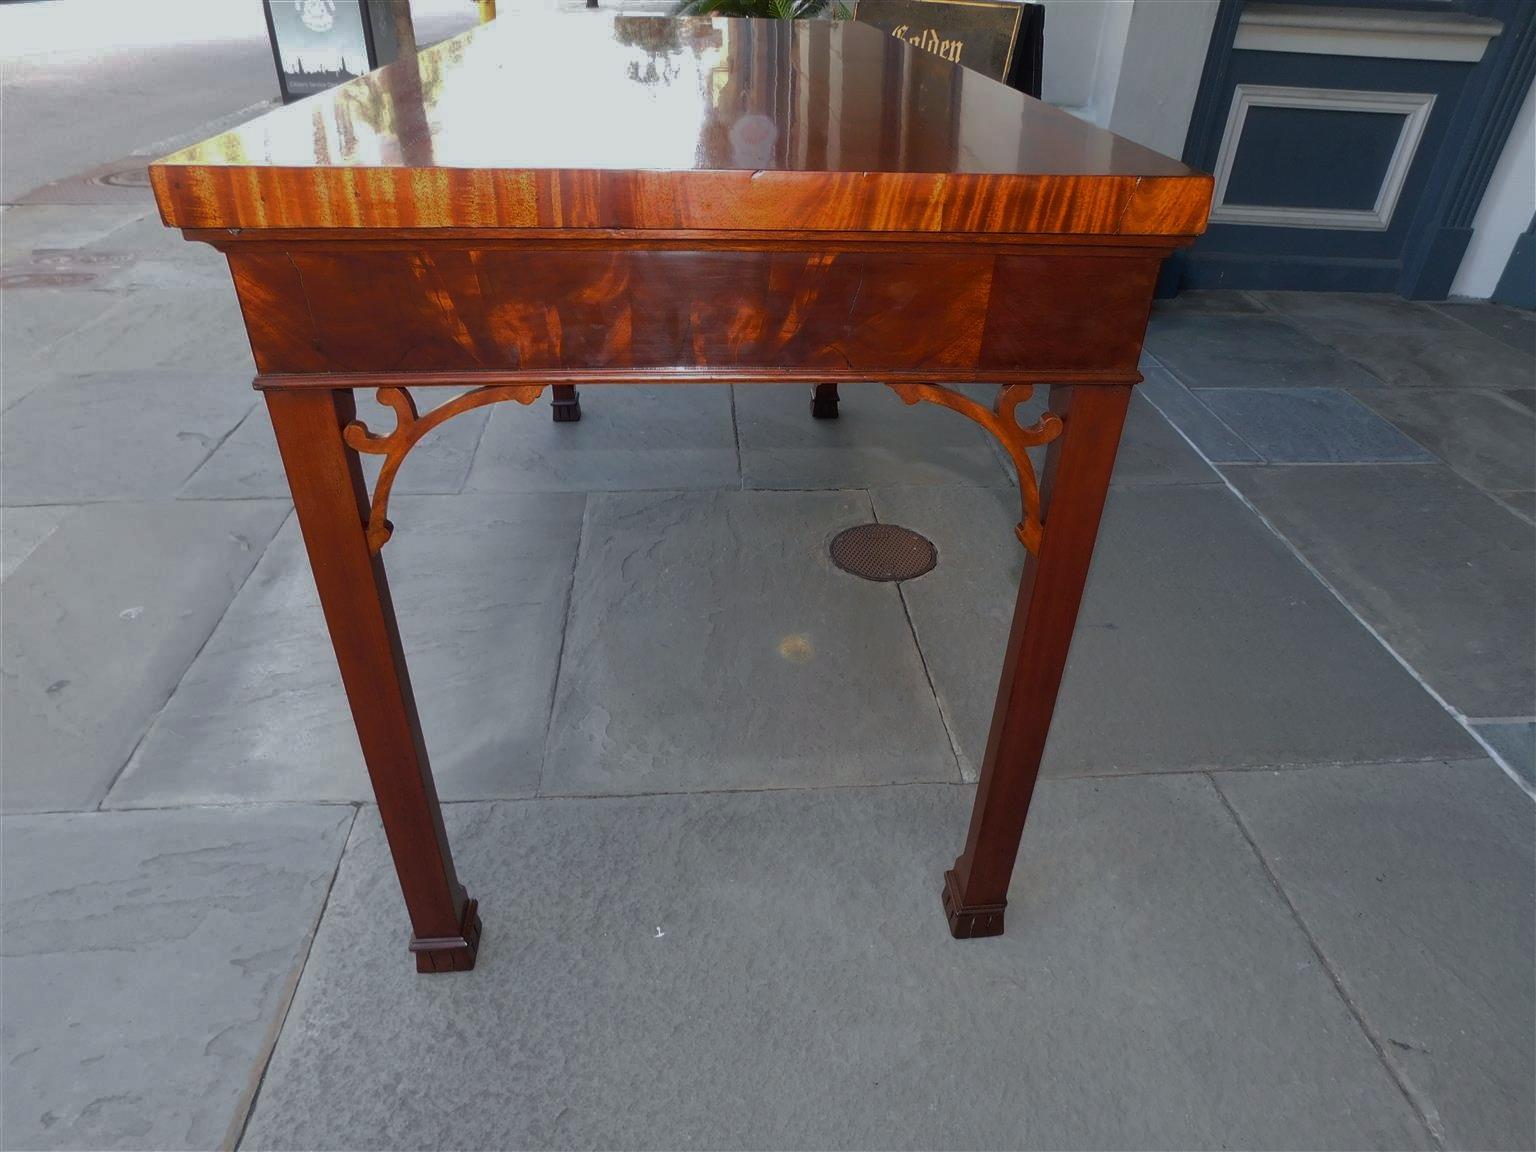 English Chippendale Mahogany Fret Work Console Table with Marlborough Feet, 1770 For Sale 3